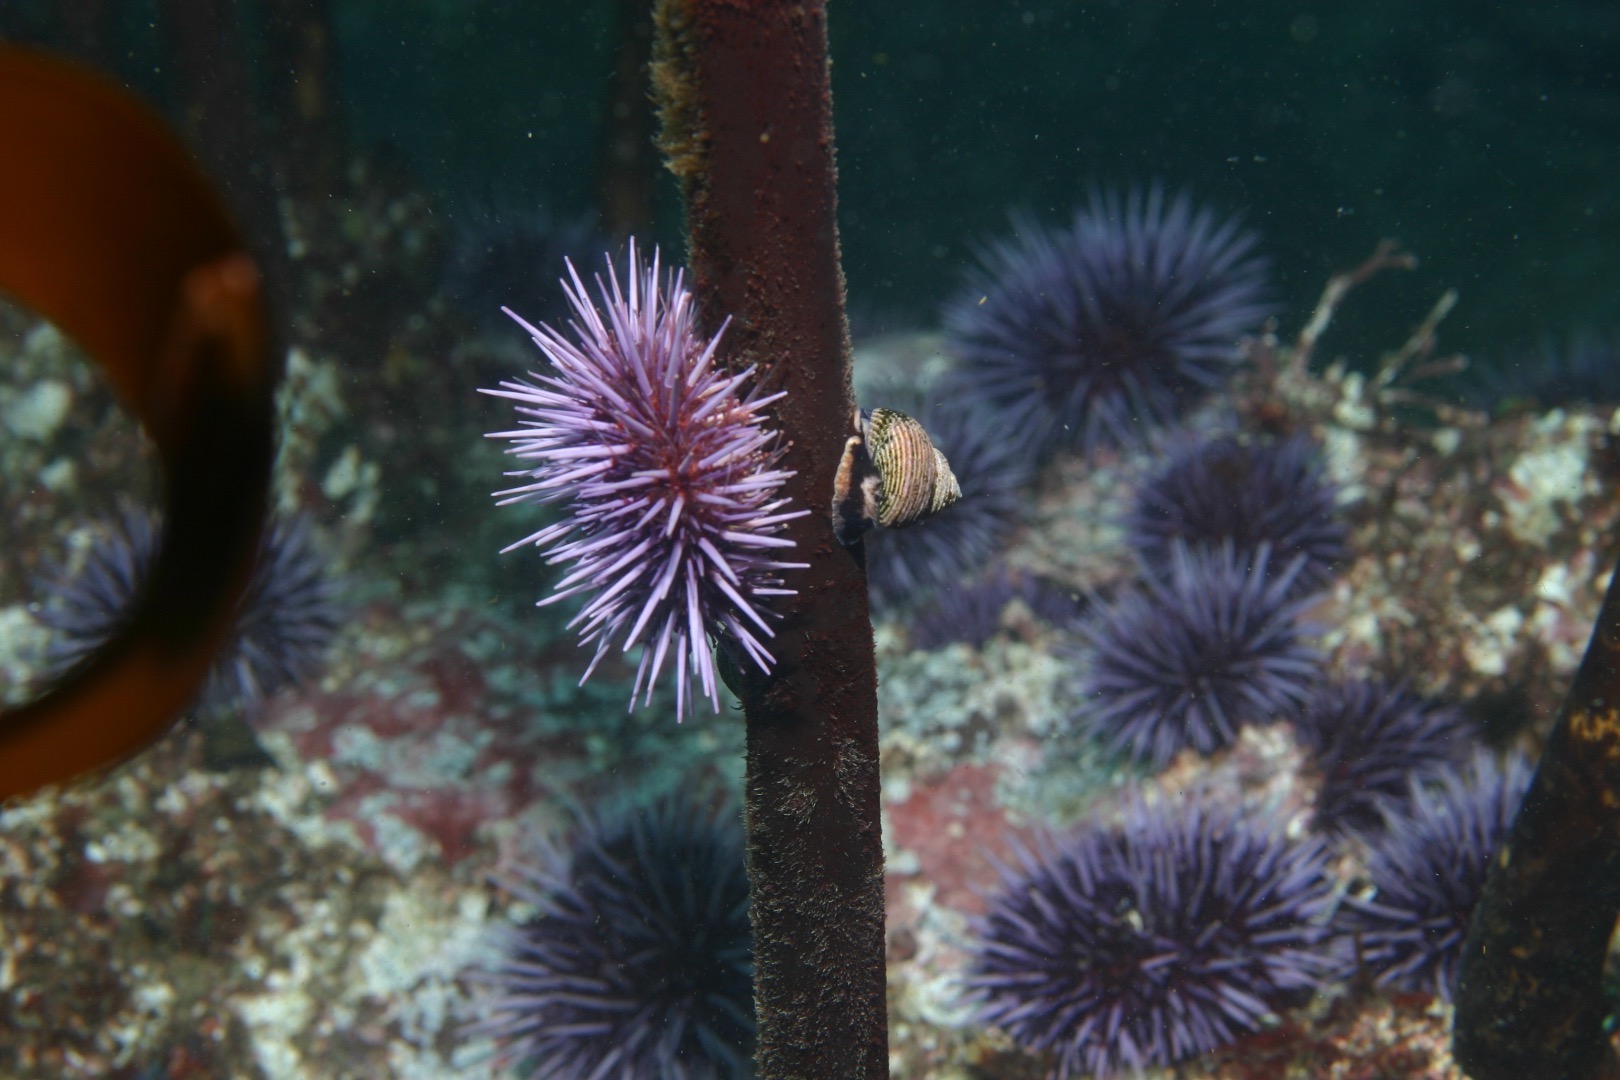 a large spiny purple urchin on a brown stalk of kelp underwater with more urchins in the background